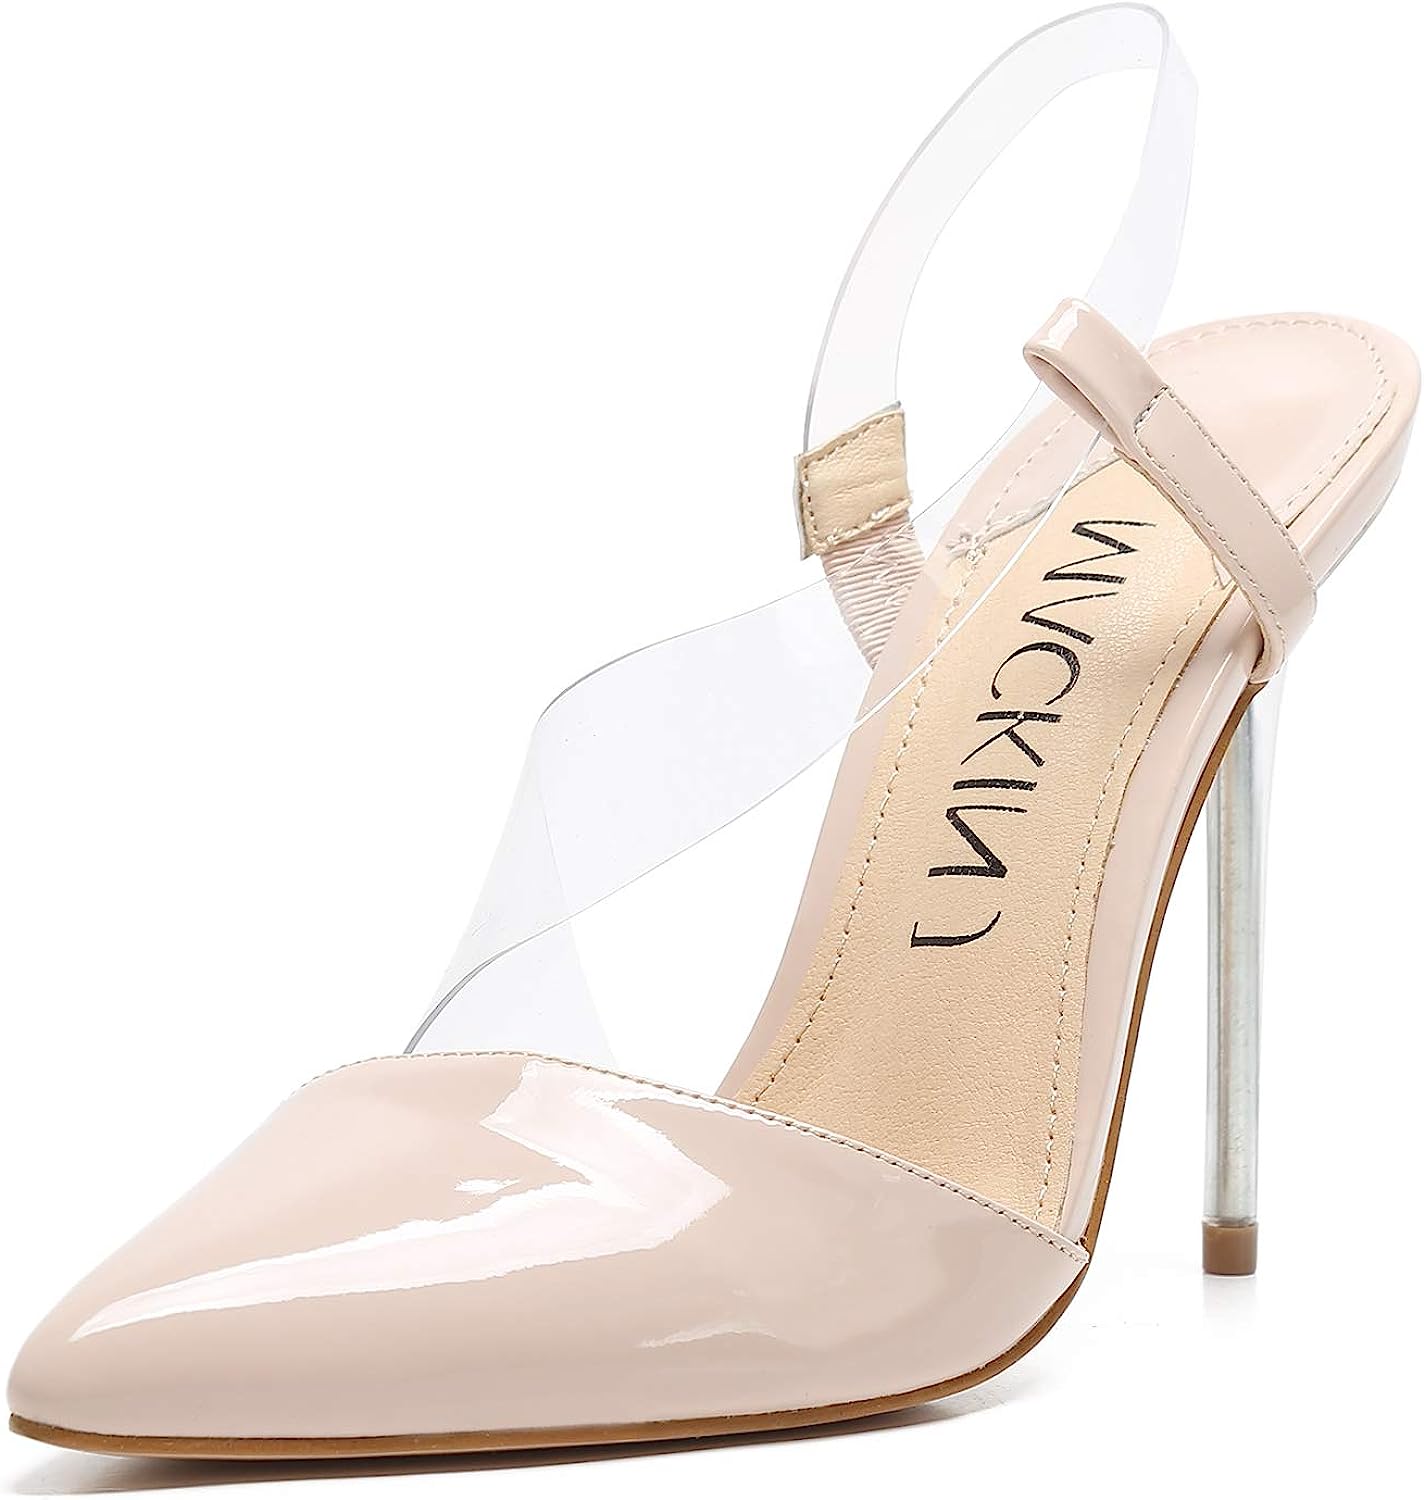 The Classics Redefined Transparent Nude Metallic Charm Heels